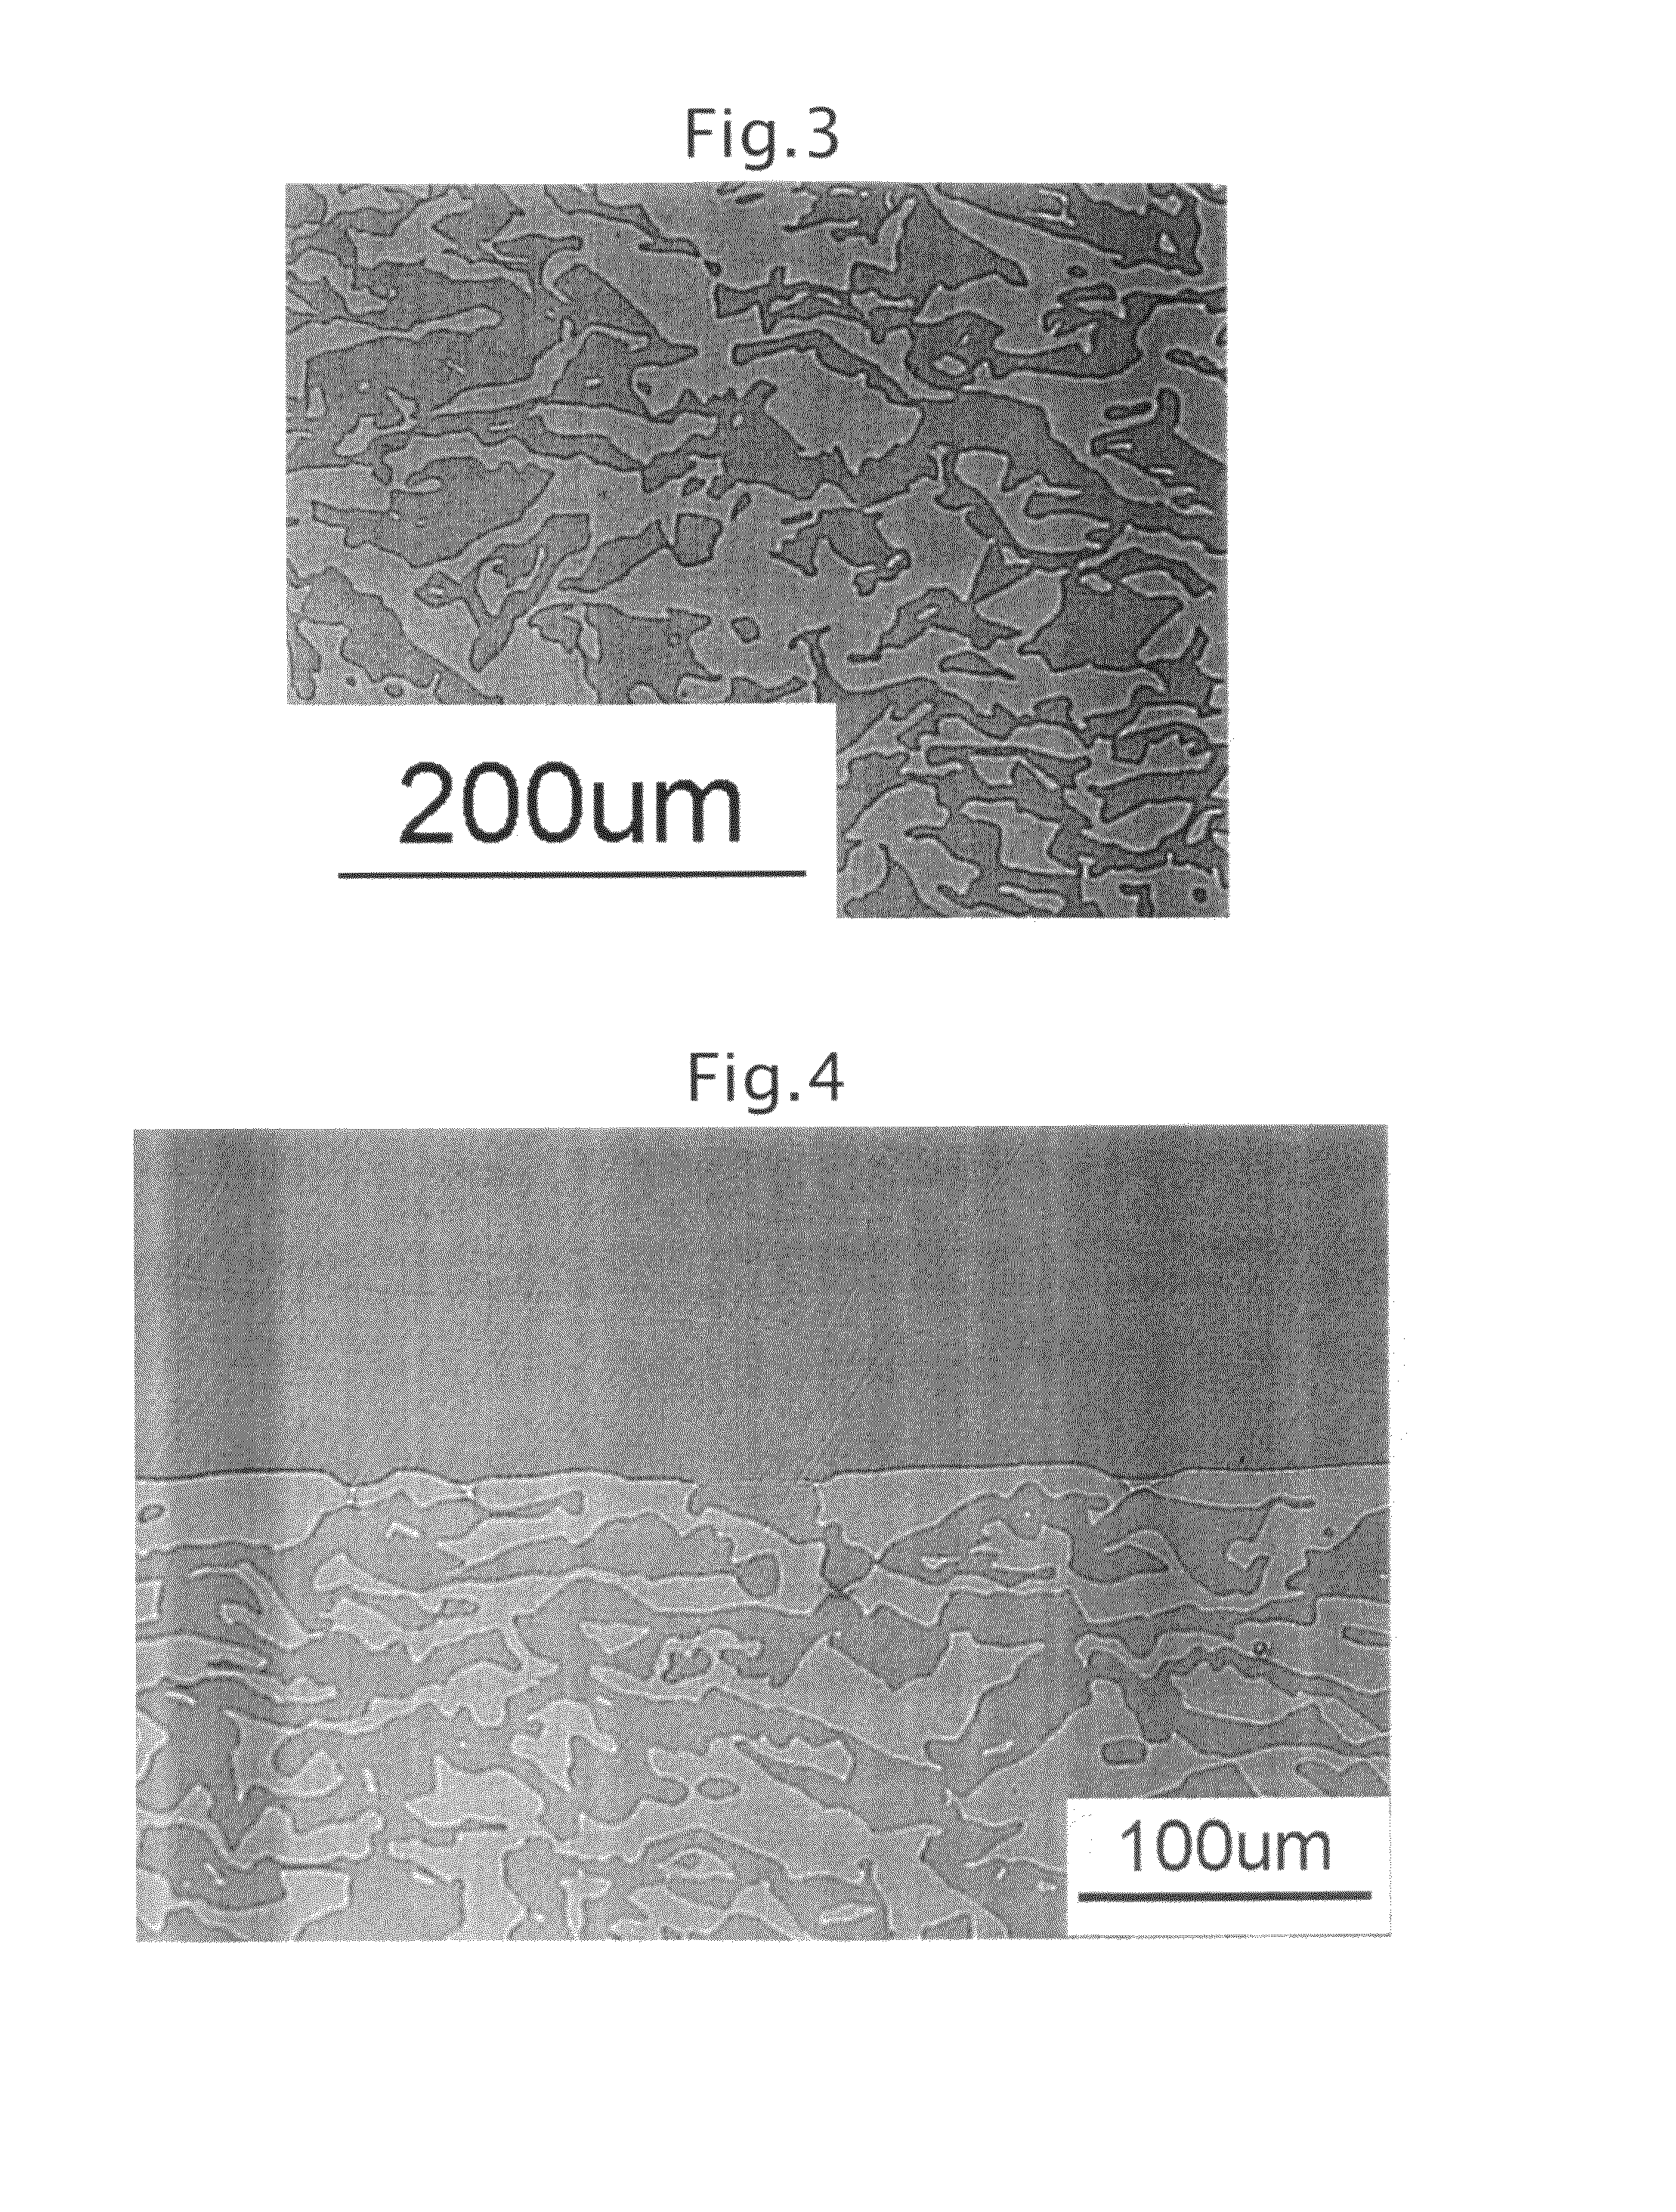 Substrate for light-emitting diode, and light-emitting diode